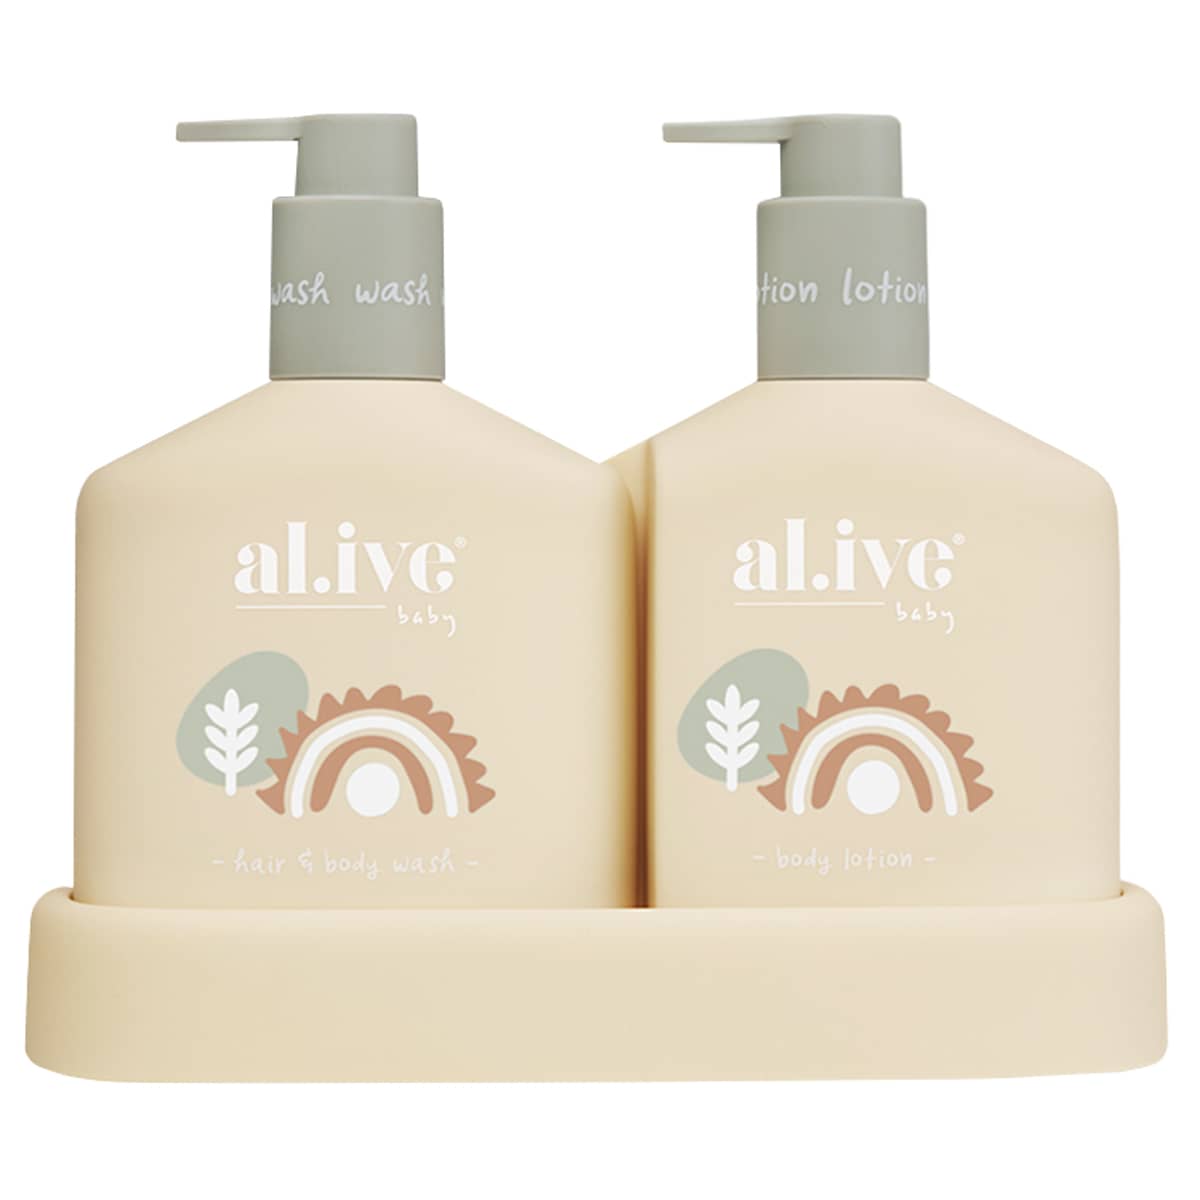 al.ive body Baby Duo - Hair/Body Wash and Lotion + Tray - Gentle Pear - New Design